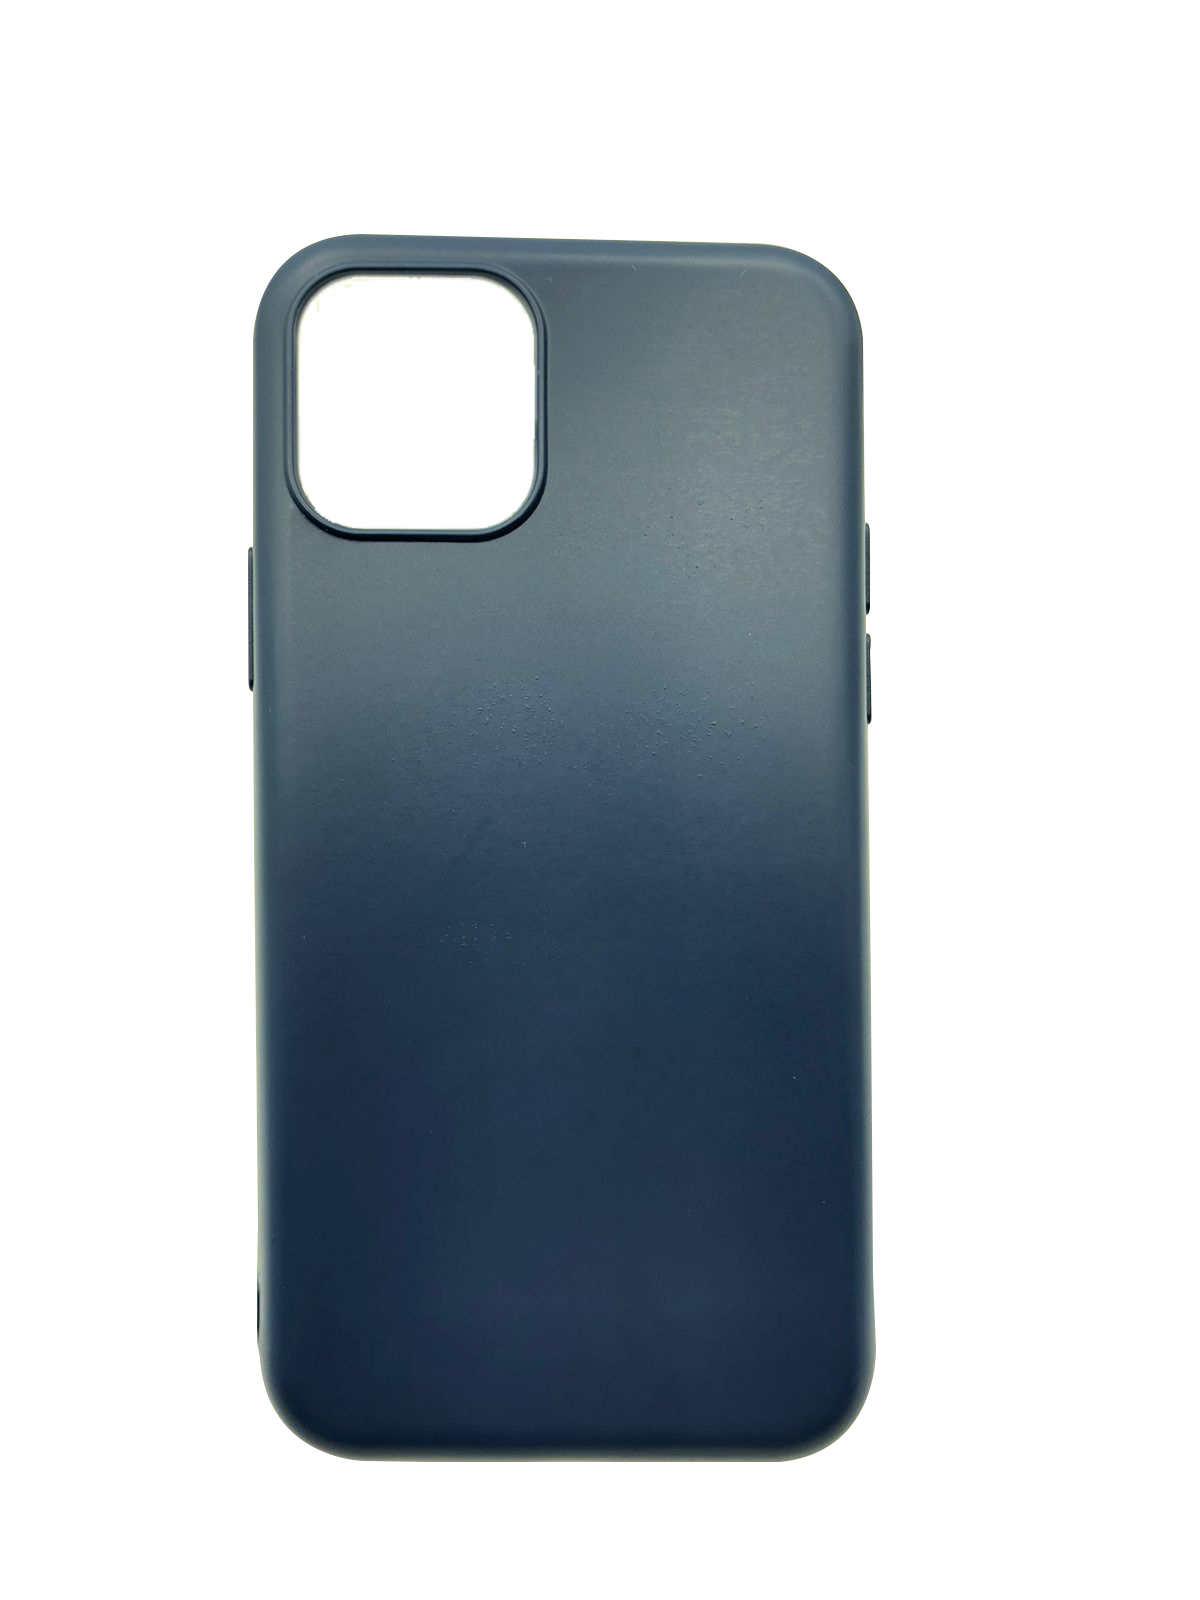 Silicone Case iPHONE 11 PRO NAVY BLUE